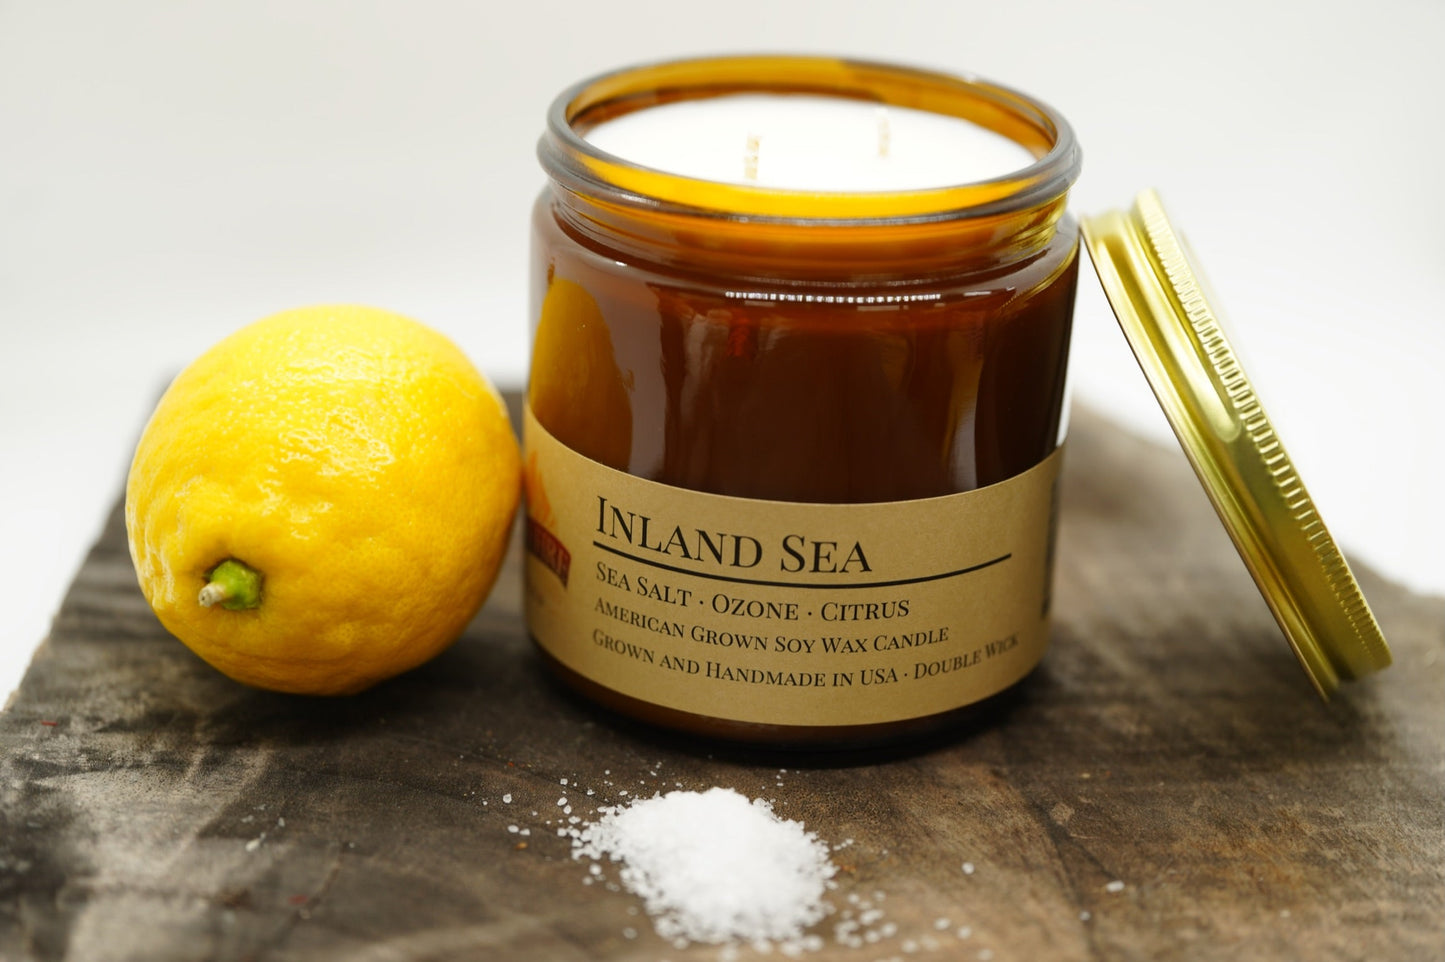 Inland Sea Soy Candle | 16 oz Double Wick Amber Apothecary Jar